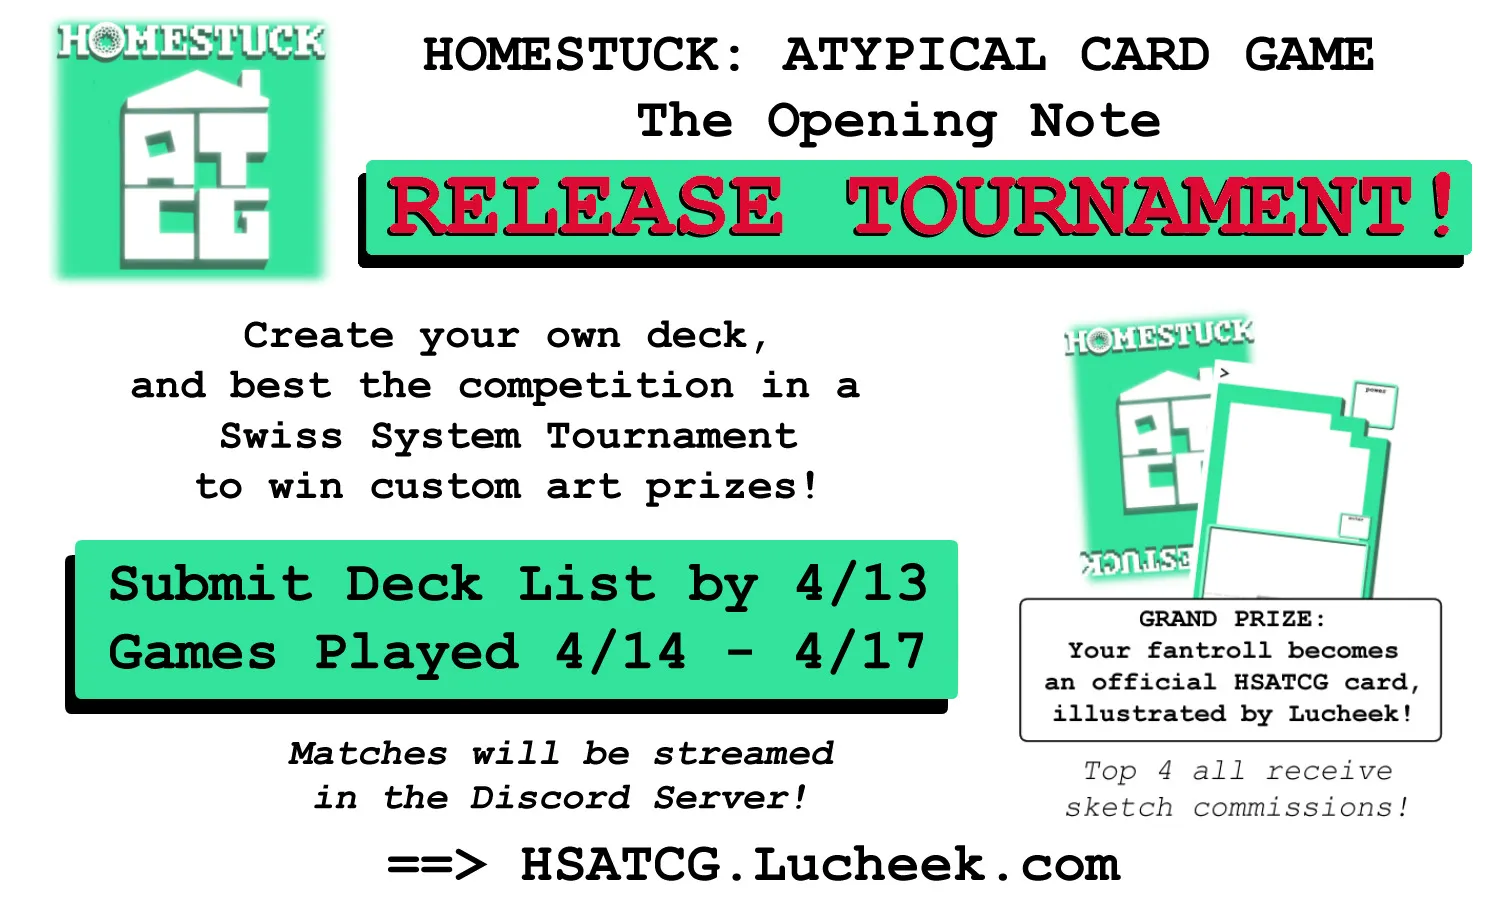 Promo banner for a tournament celebrating the release of Homestuck: Atypical Card Game and its first card set, The Opening Note. You can build your own deck and compete in a Swiss-style tournament to win cusotm art prizes. If you want to participate, you should submit your deck list by April 13th, 2024. Games will be played from April 14th through April 17th. The matches will be streamed in the discord server. The grand prize is for your fan troll to be illustrated by Lucheek and added to the game, and the top four players all receive sketch commissions.